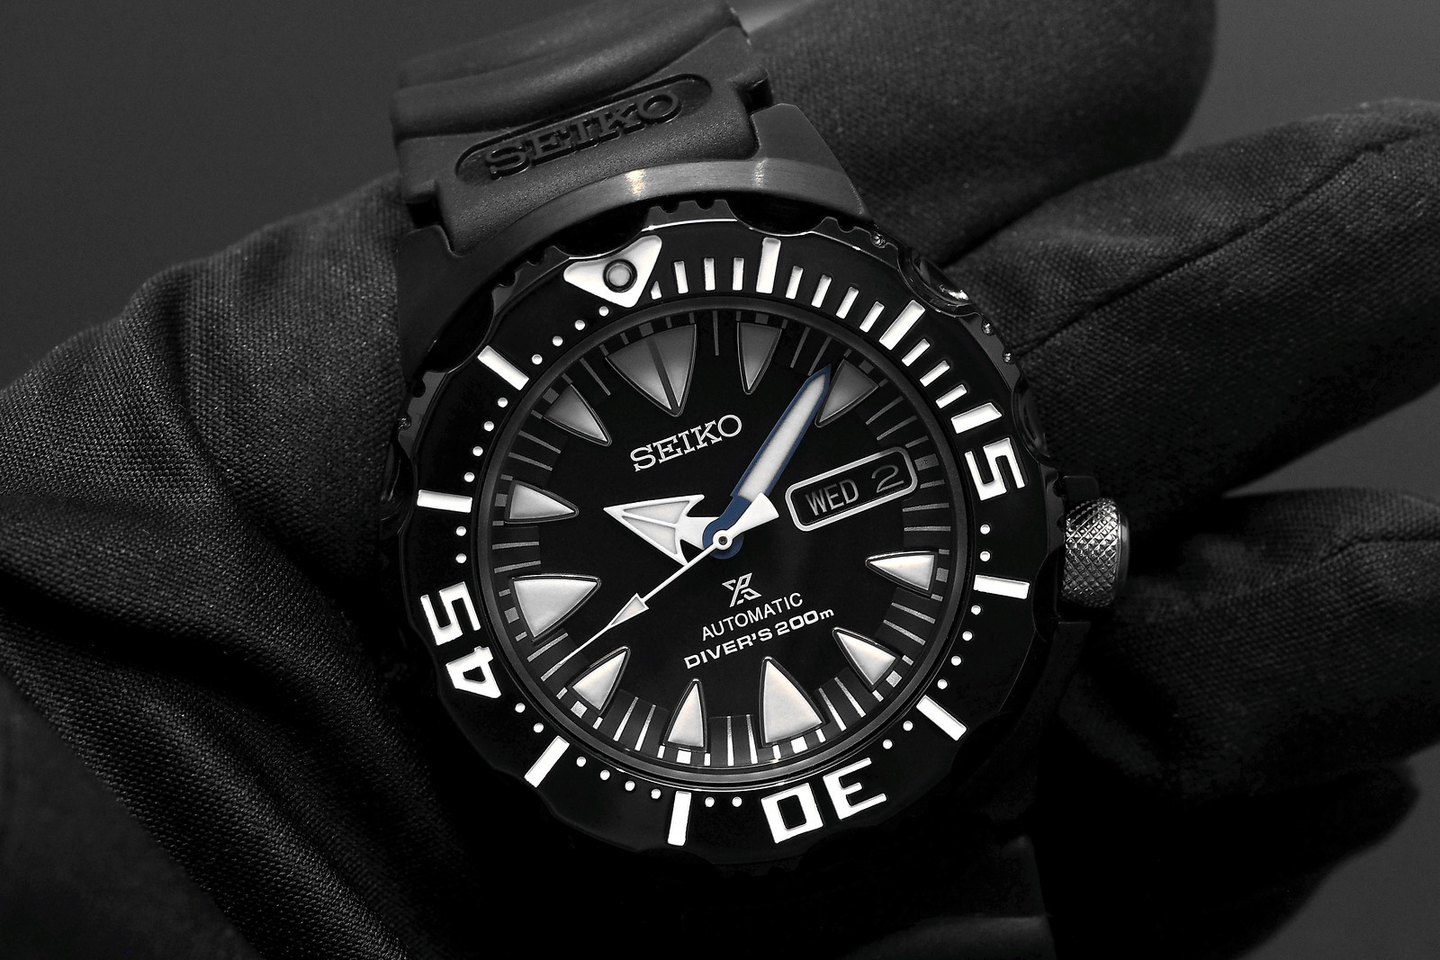 Introducing the Seiko Prospex Air Dive “Monster”